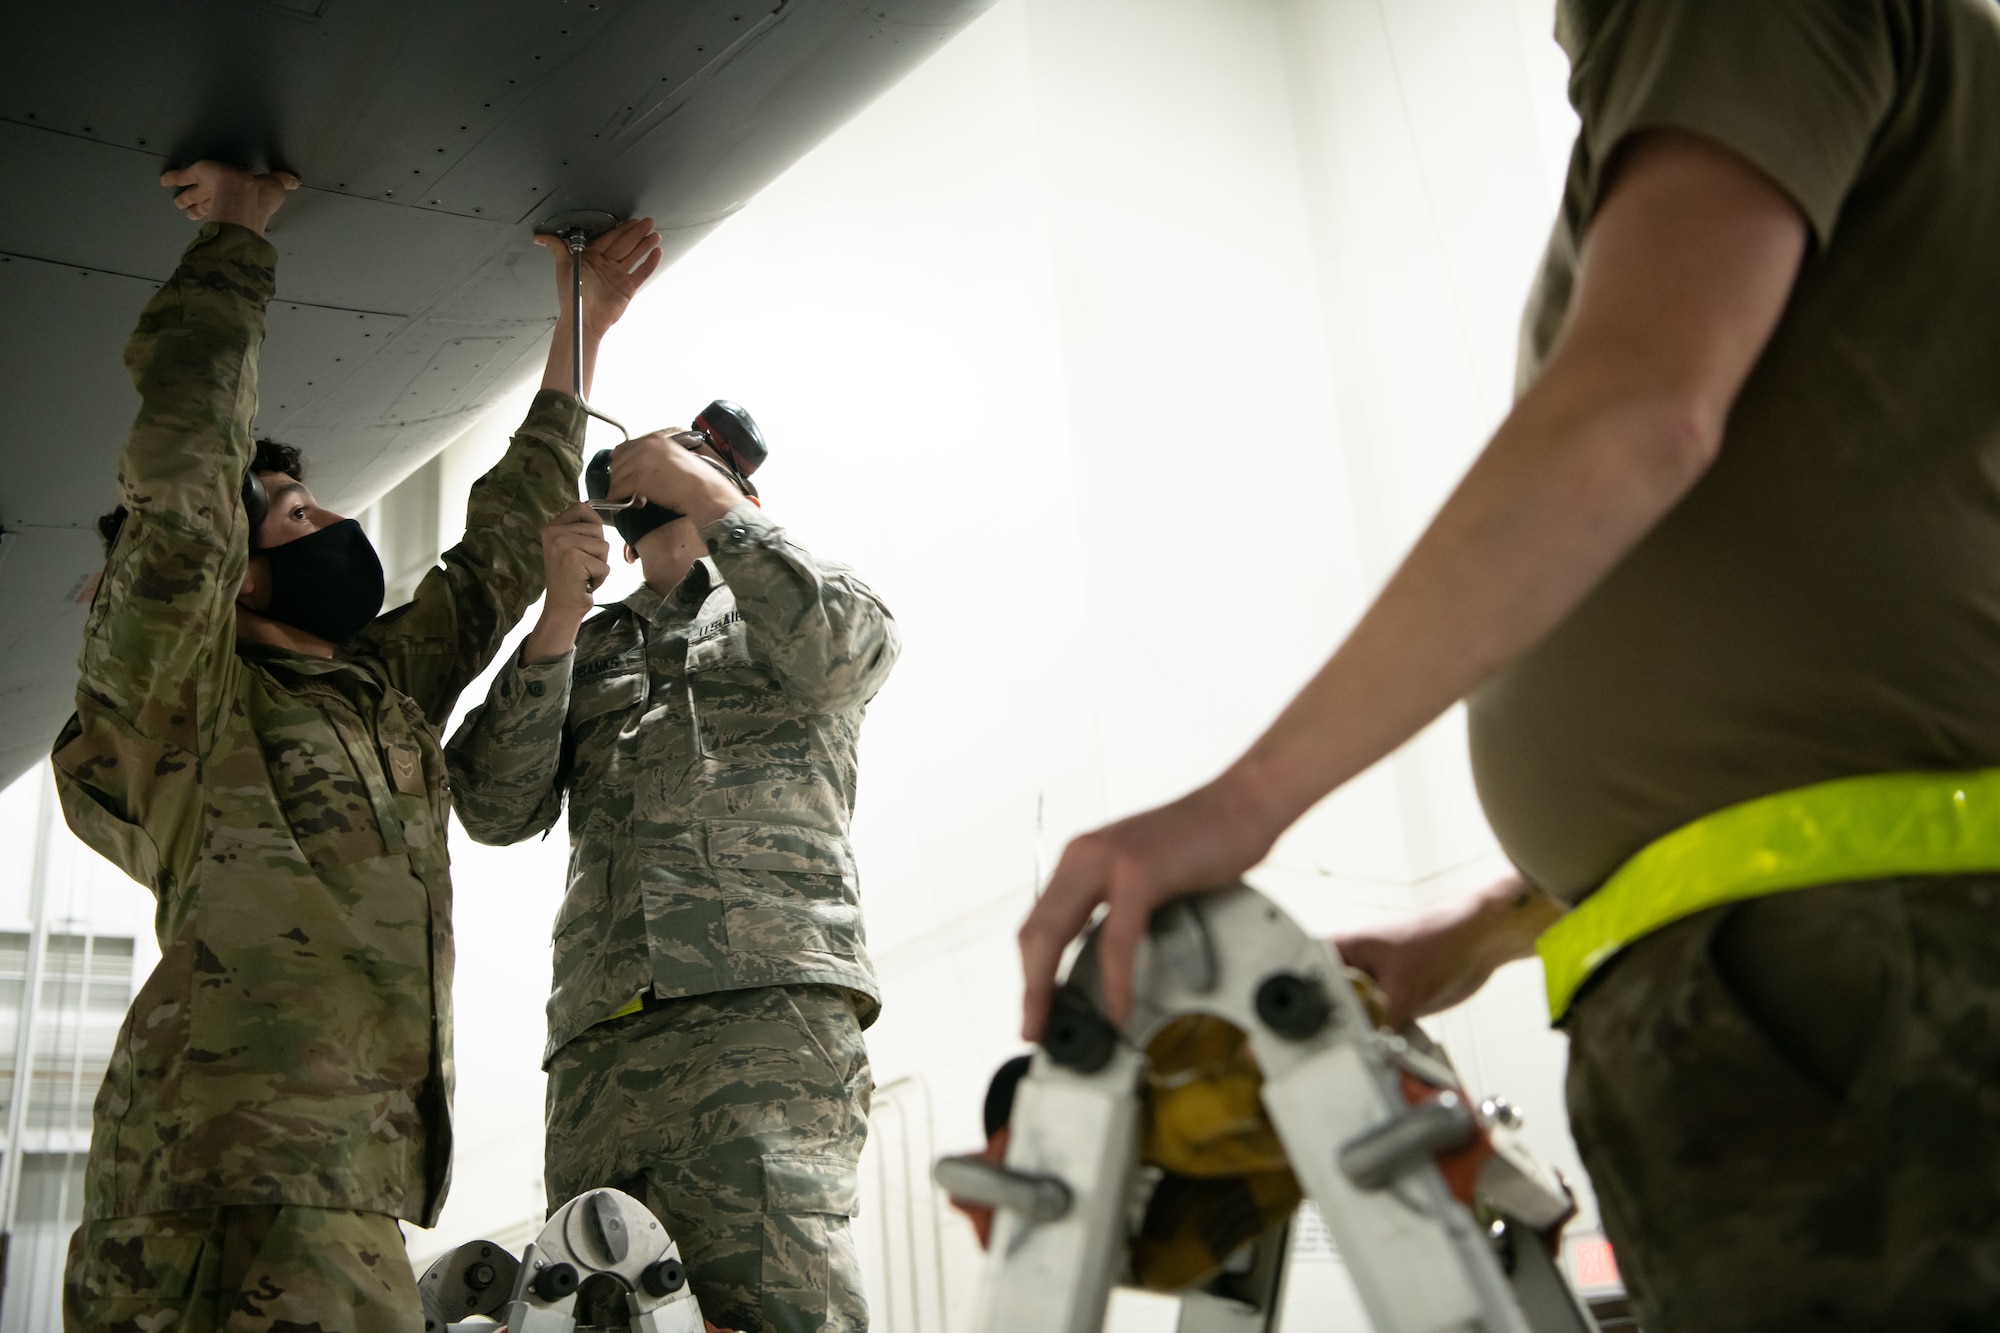 Airmen 1st Class Antonio Artiaga and Kane Eubanks, both from the 28th Aircraft Maintenance Squadron, prepare a B-1B Lancer for divestiture at Ellsworth Air Force Base, S.D., Feb. 16, 2021. The divestment of 17 B-1 aircraft from the fleet is the beginning of the retirement of legacy bombers that will pave the way for the B-21 Bomber to be brought online. (U.S. Air Force photo by Airman Jonah Fronk)